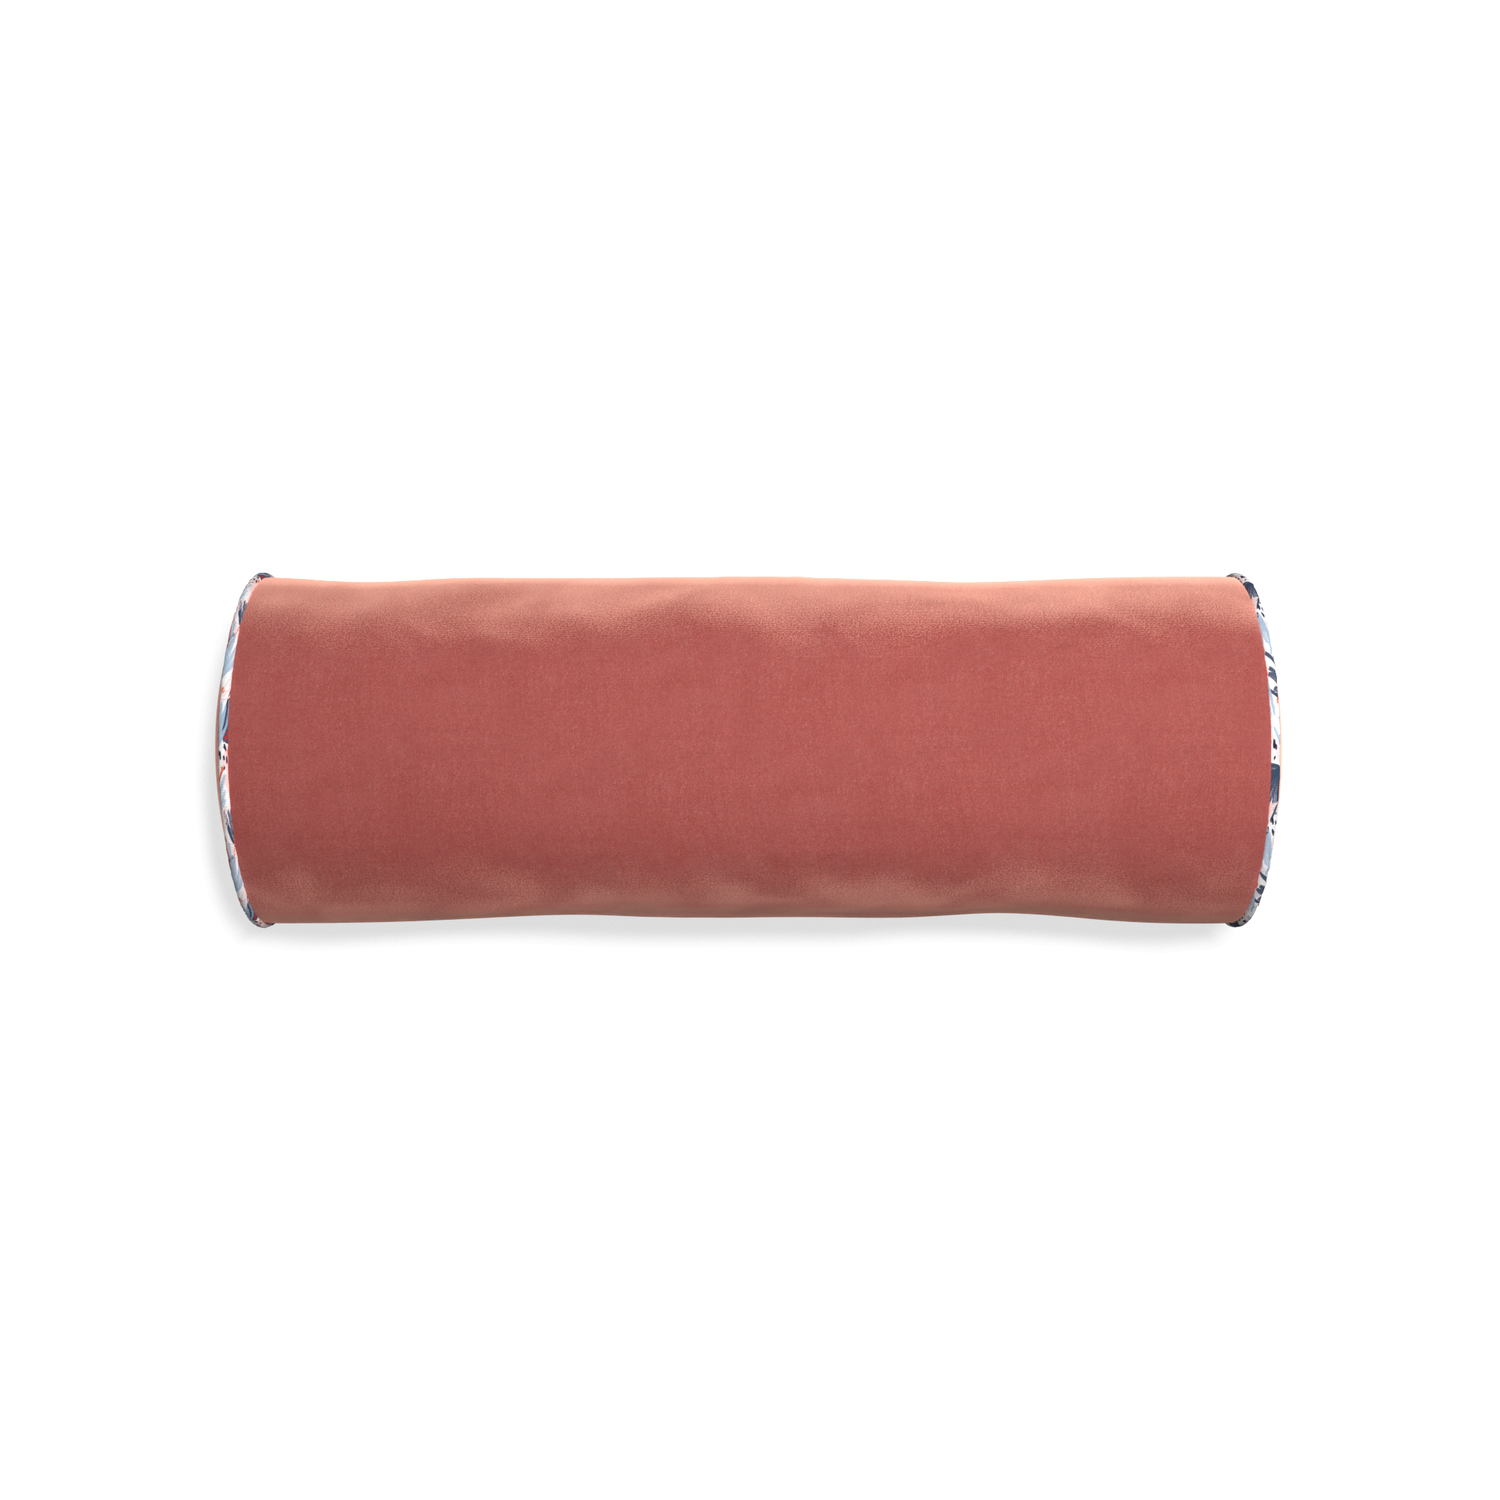 bolster coral velvet pillow with red and blue piping 